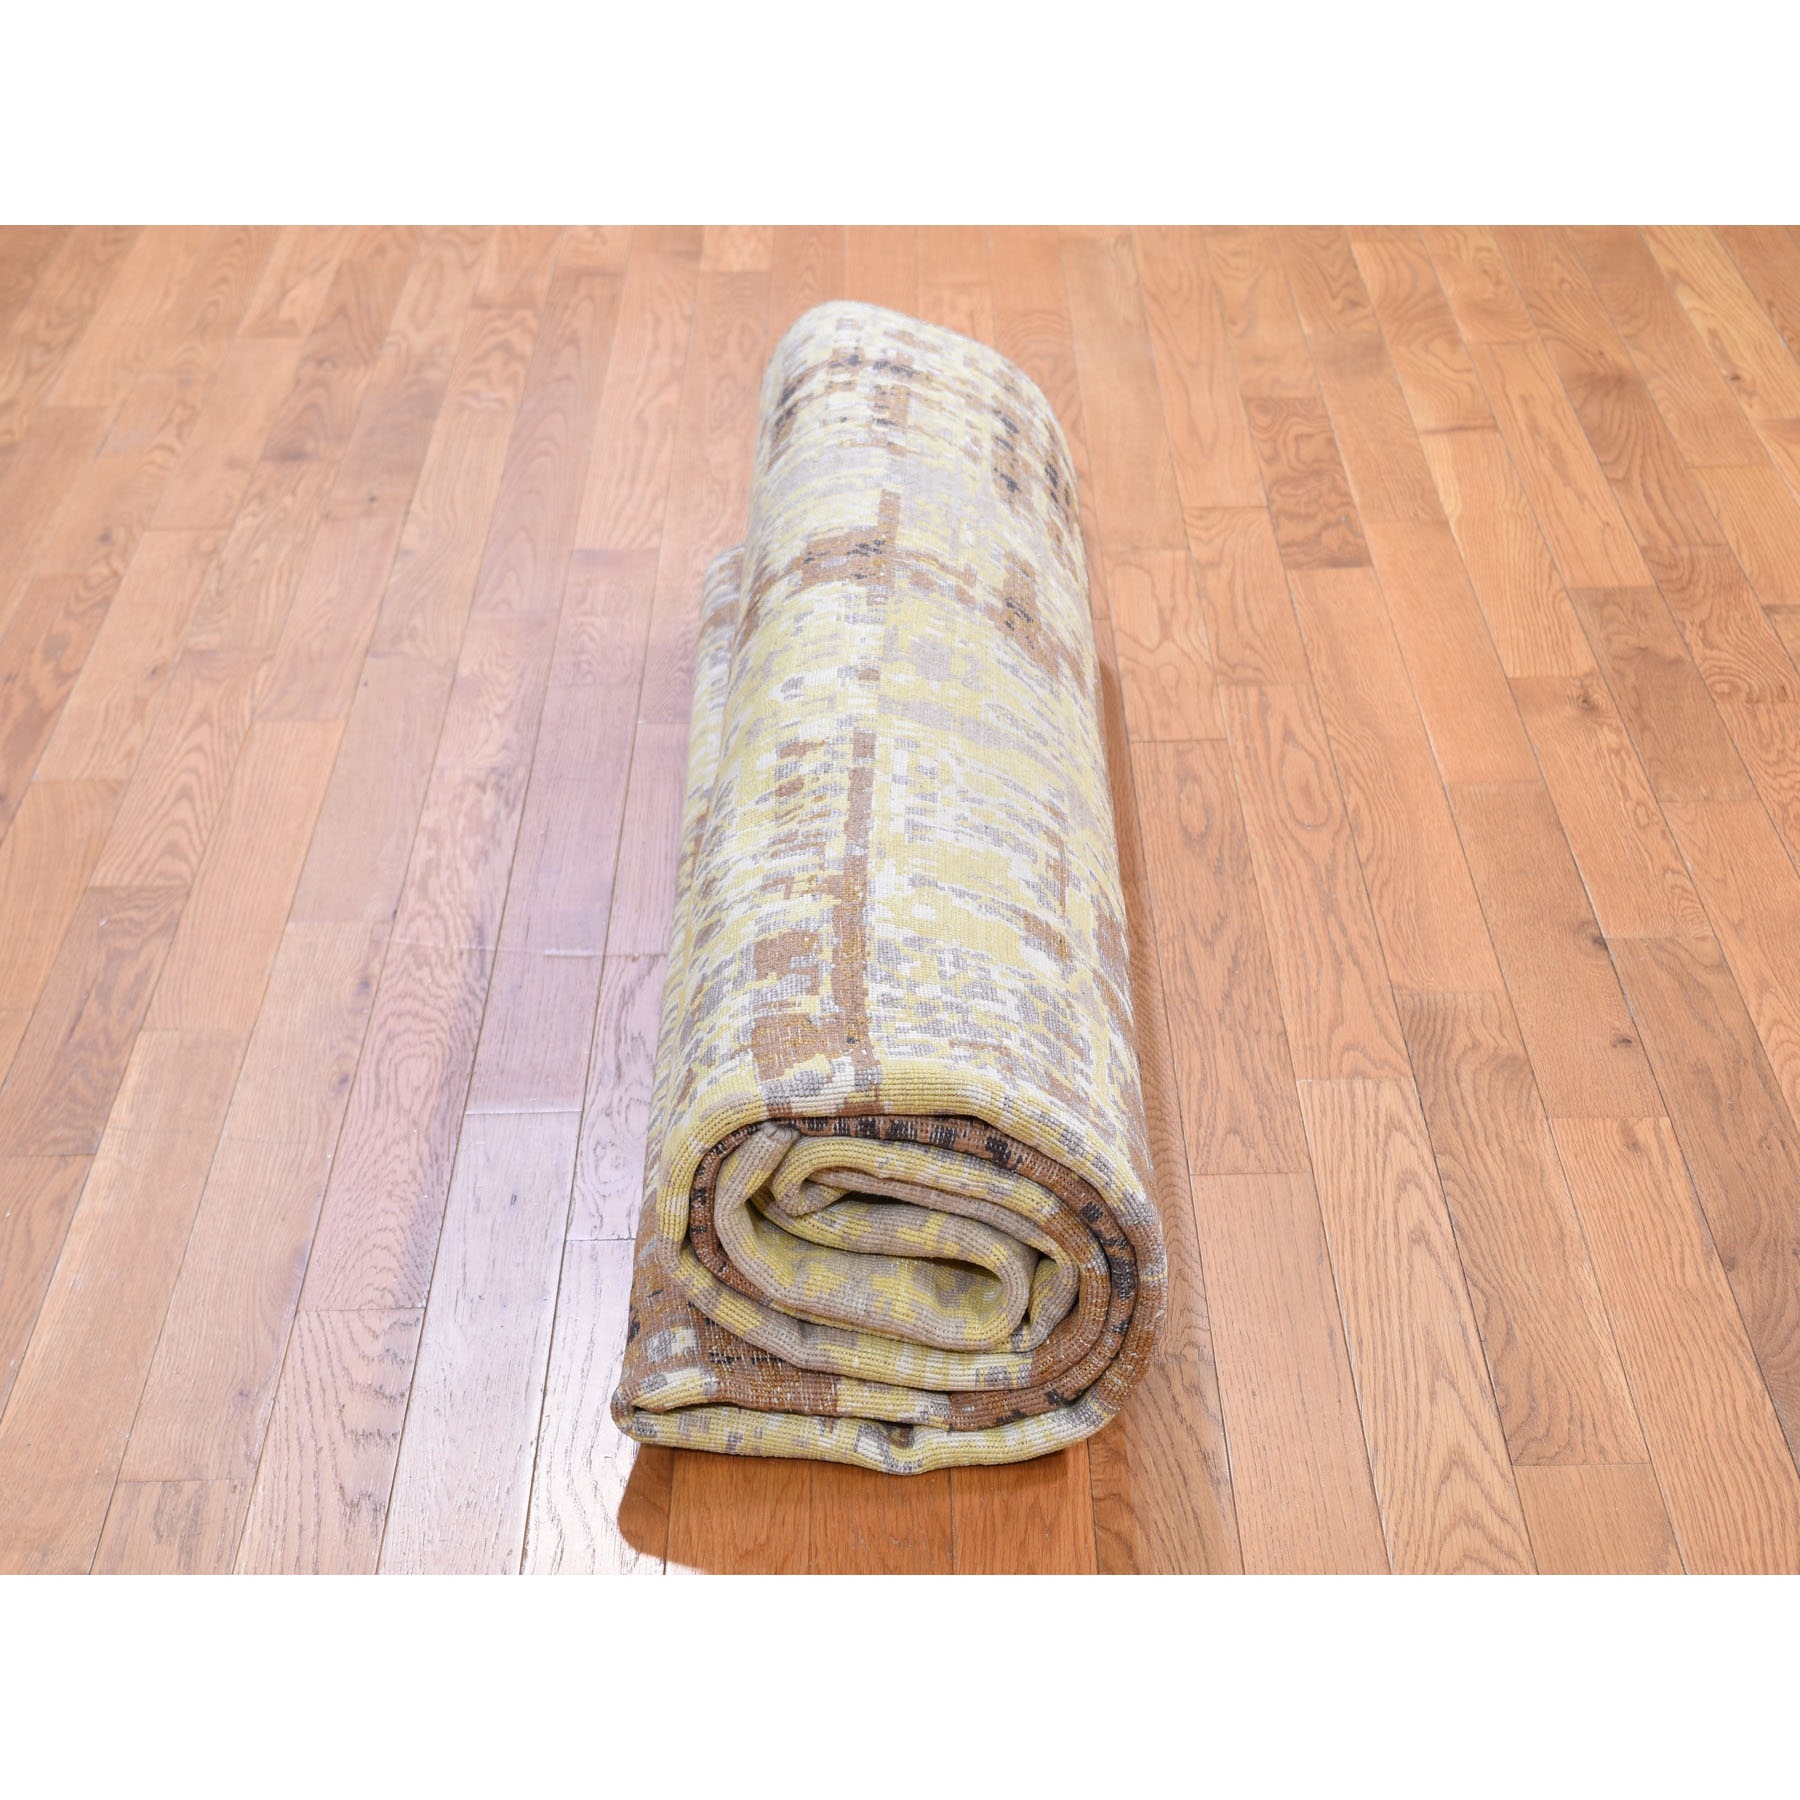 8-x9-10  Yellow Abstract Design Silk With Textured Wool Hand Knotted Oriental Rug 